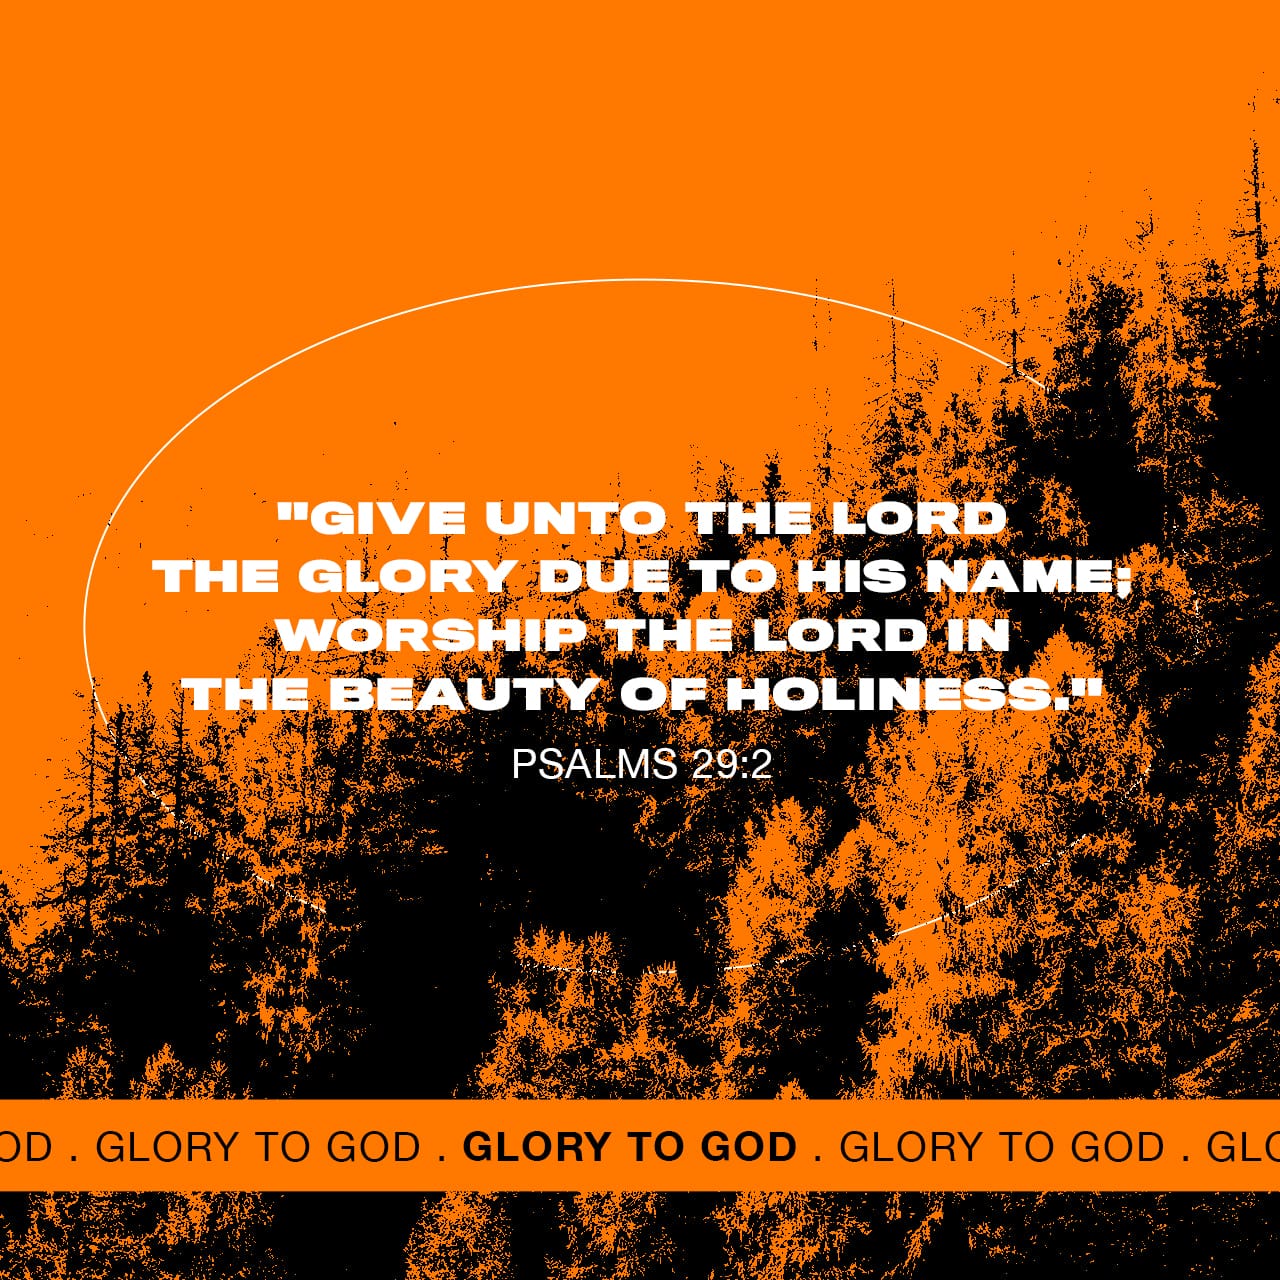 70 Epic Bible Verses About God's Glory (Honor To The Lord)